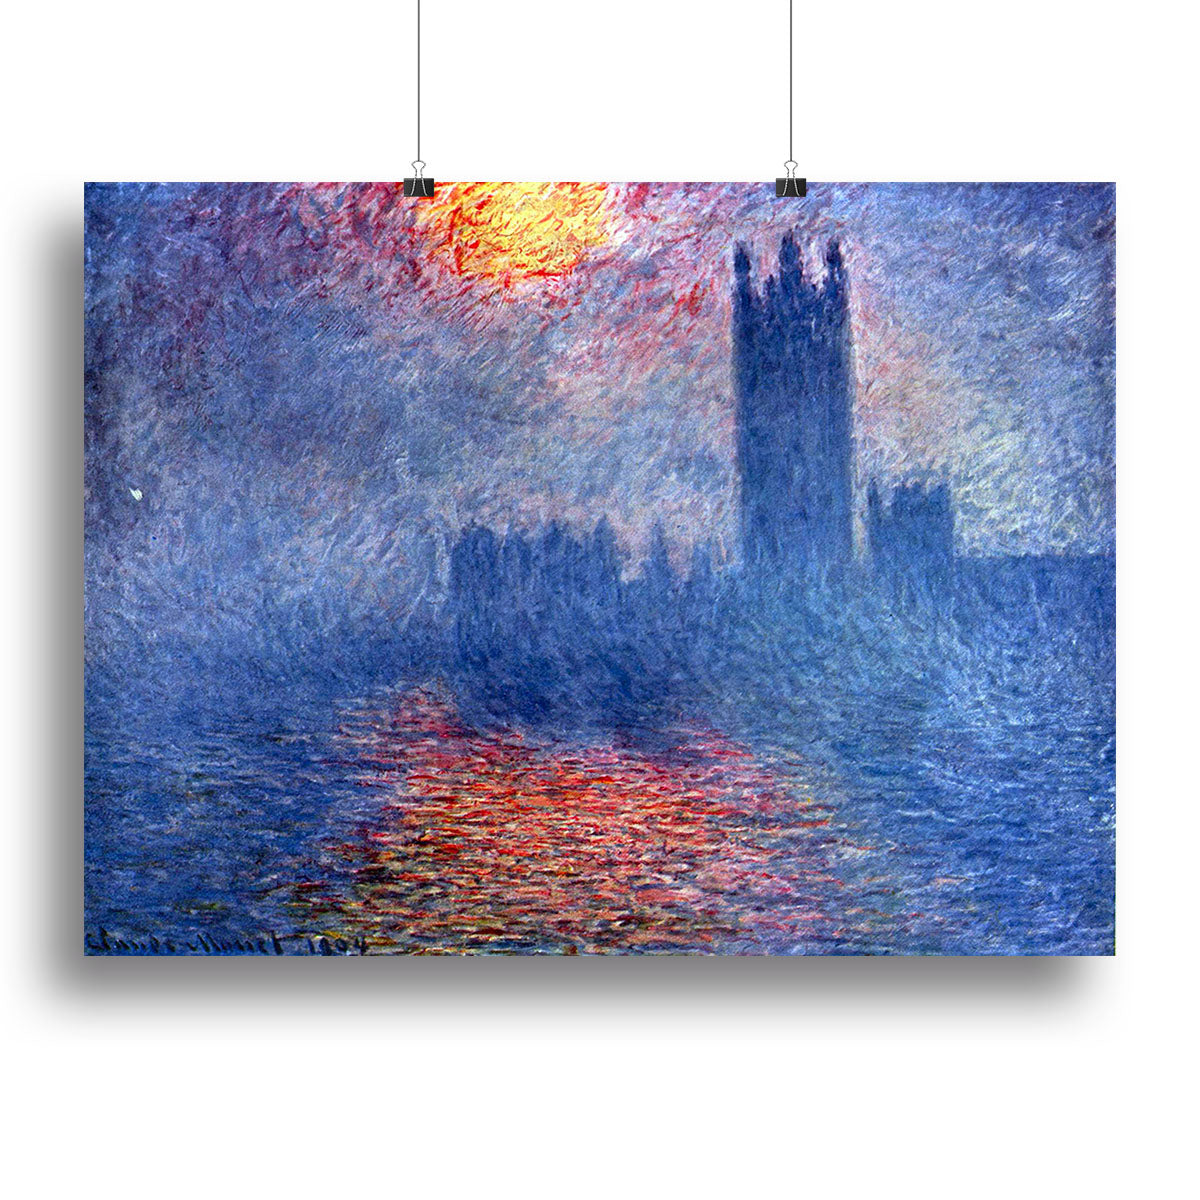 The Parlaiment in London by Monet Canvas Print or Poster - Canvas Art Rocks - 2